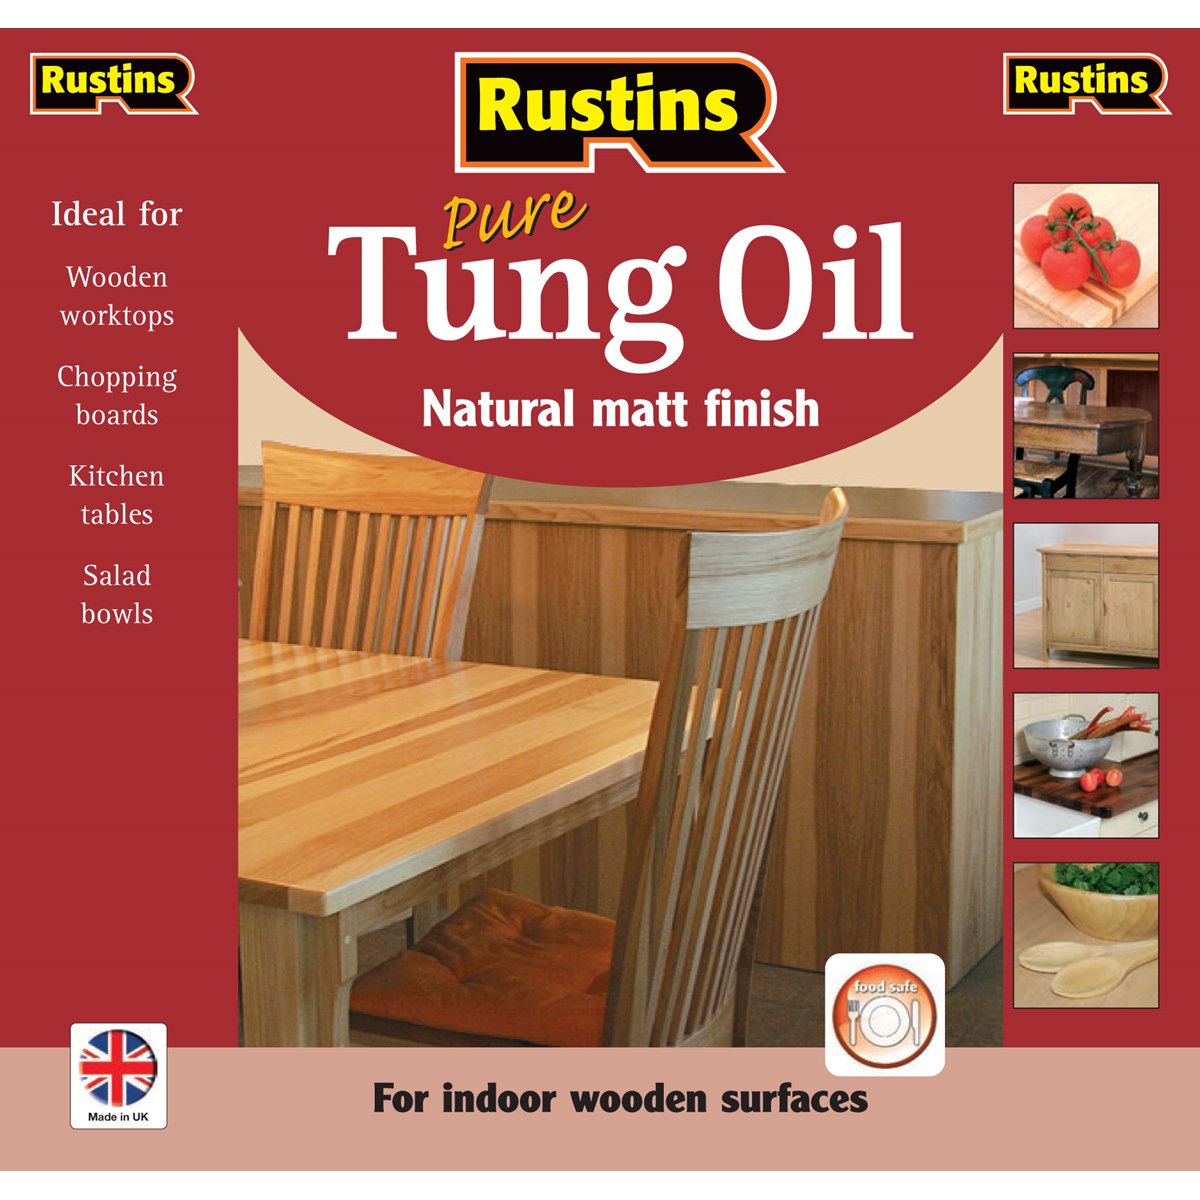 Where to Buy Pure Tung Oil